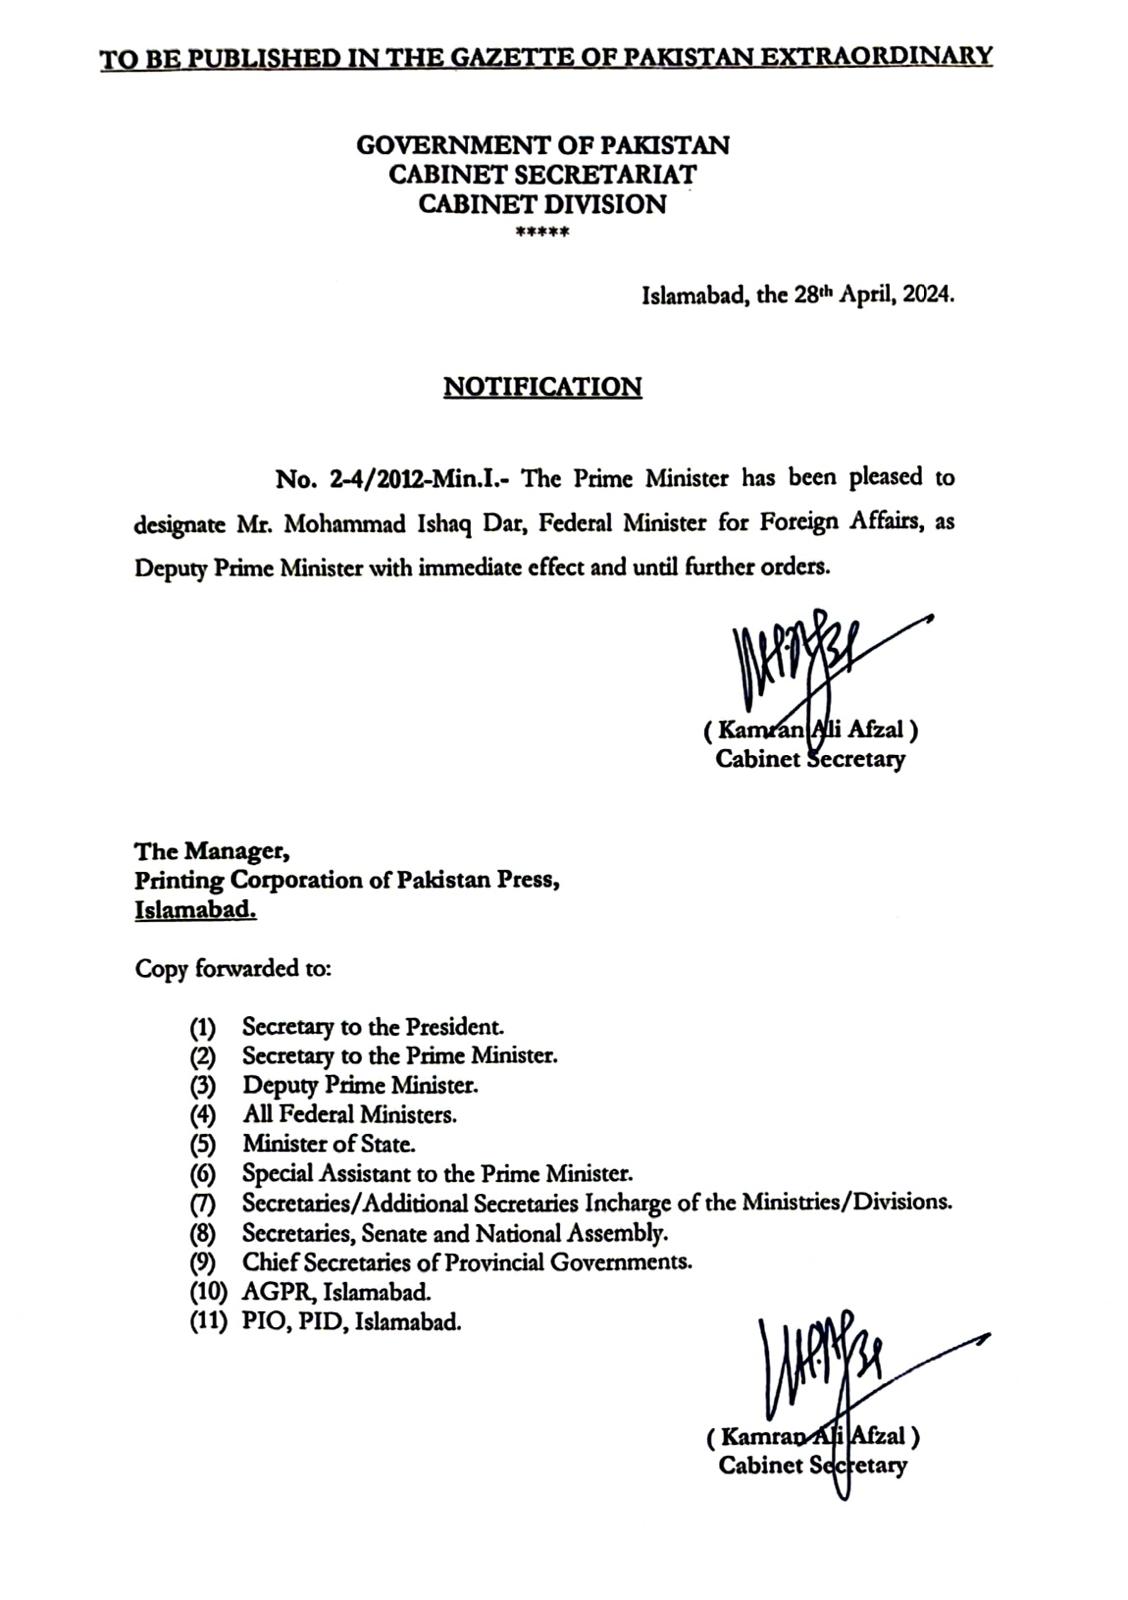 Ishaq Dar Appointed as Deputy Prime Minister of Pakistan